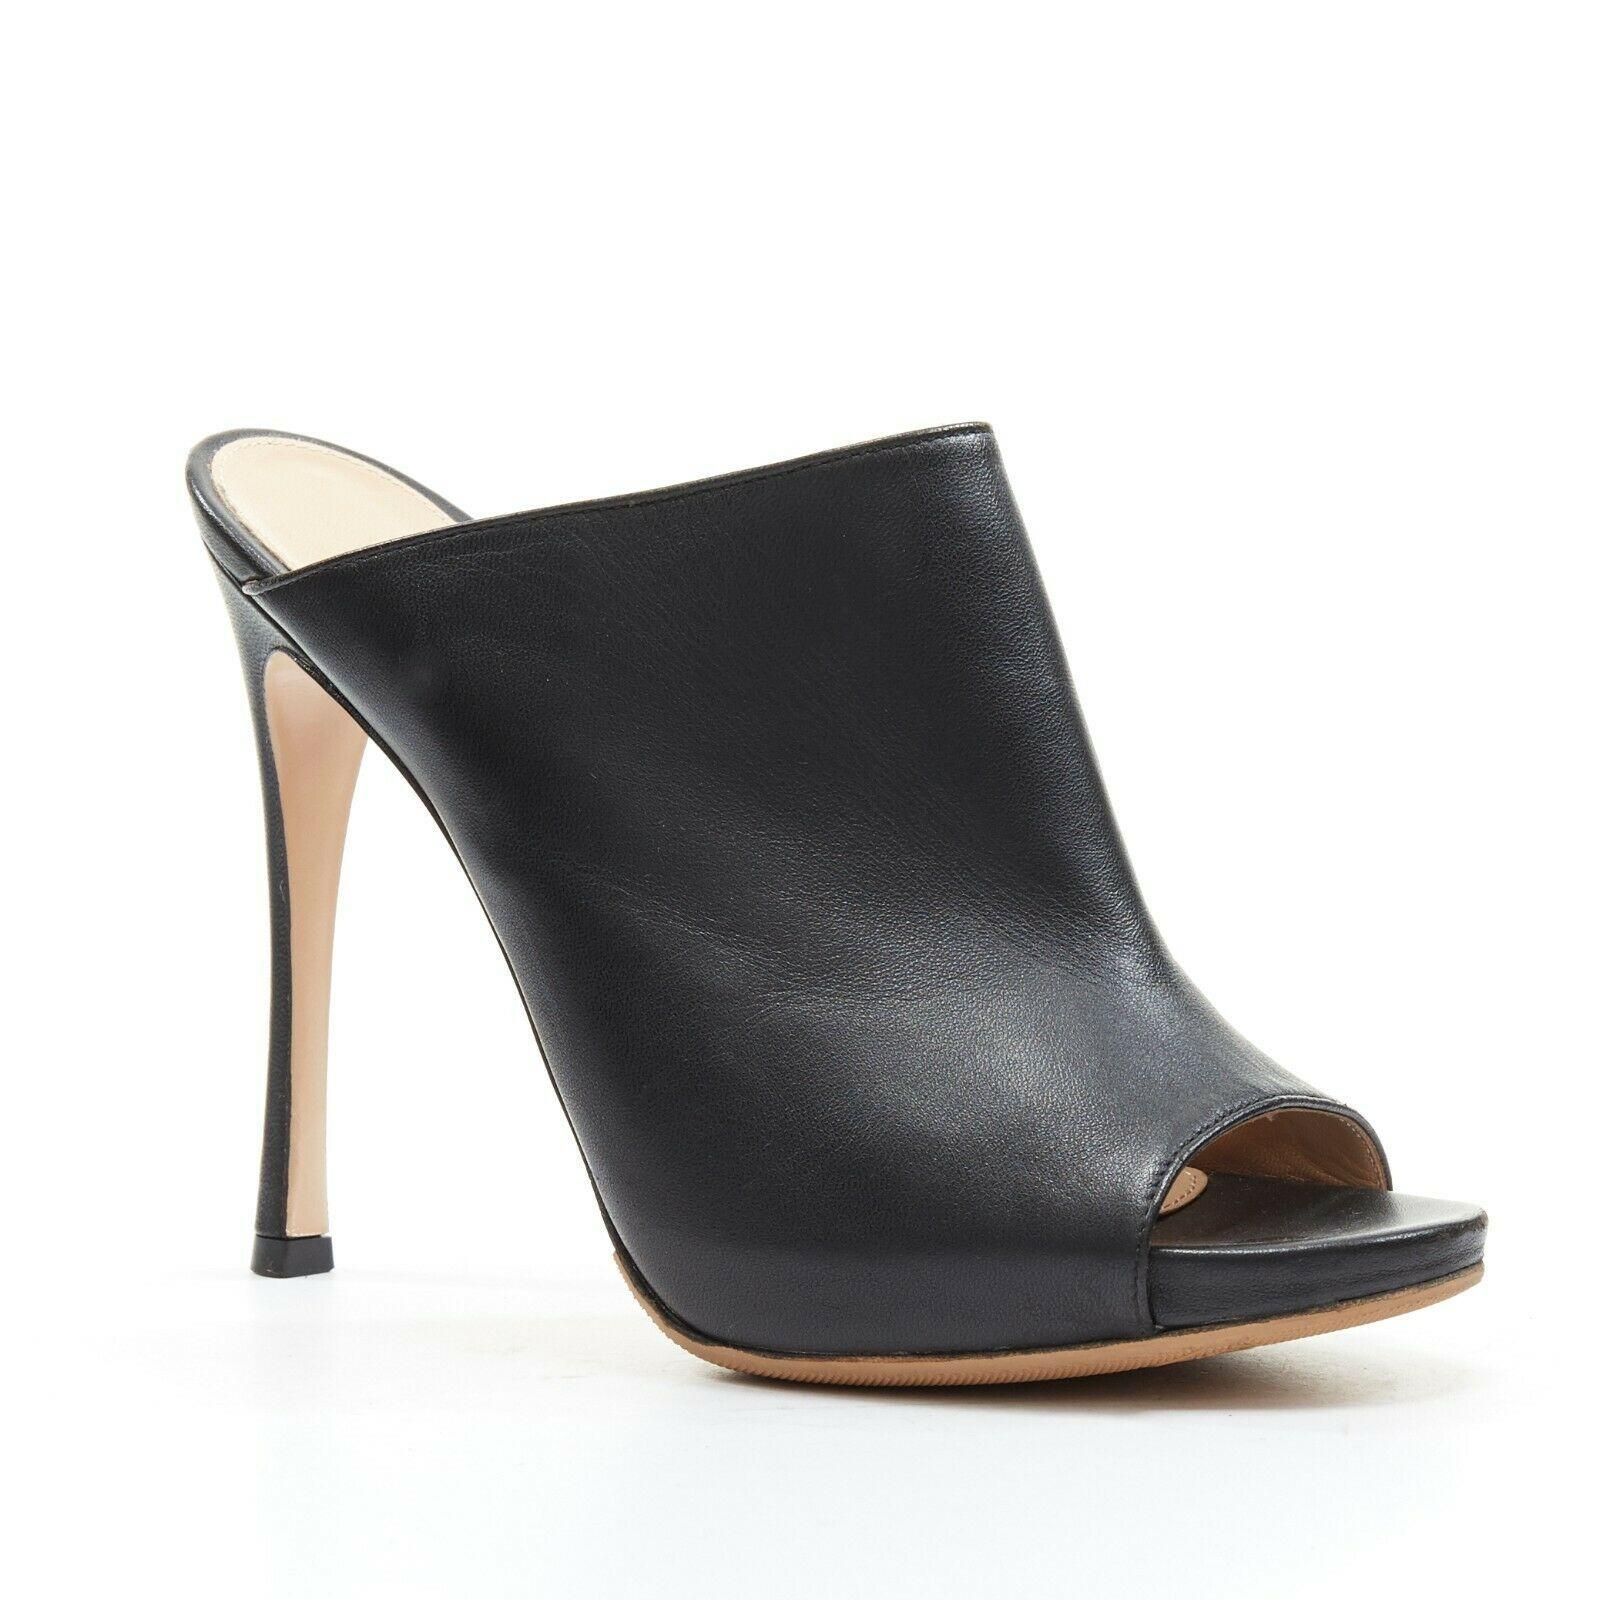 GIANVITO ROSSI black leather open toe high heel slip on mule EU37
GIANVITO ROSSI
Black leather upper. 
Open toe. 
Concealed platform. 
Tonal stitching. 
Slip on mule. 
Stiletto heel. 
Made in Italy.

CONDITION:
Very good, this item was pre-owned and